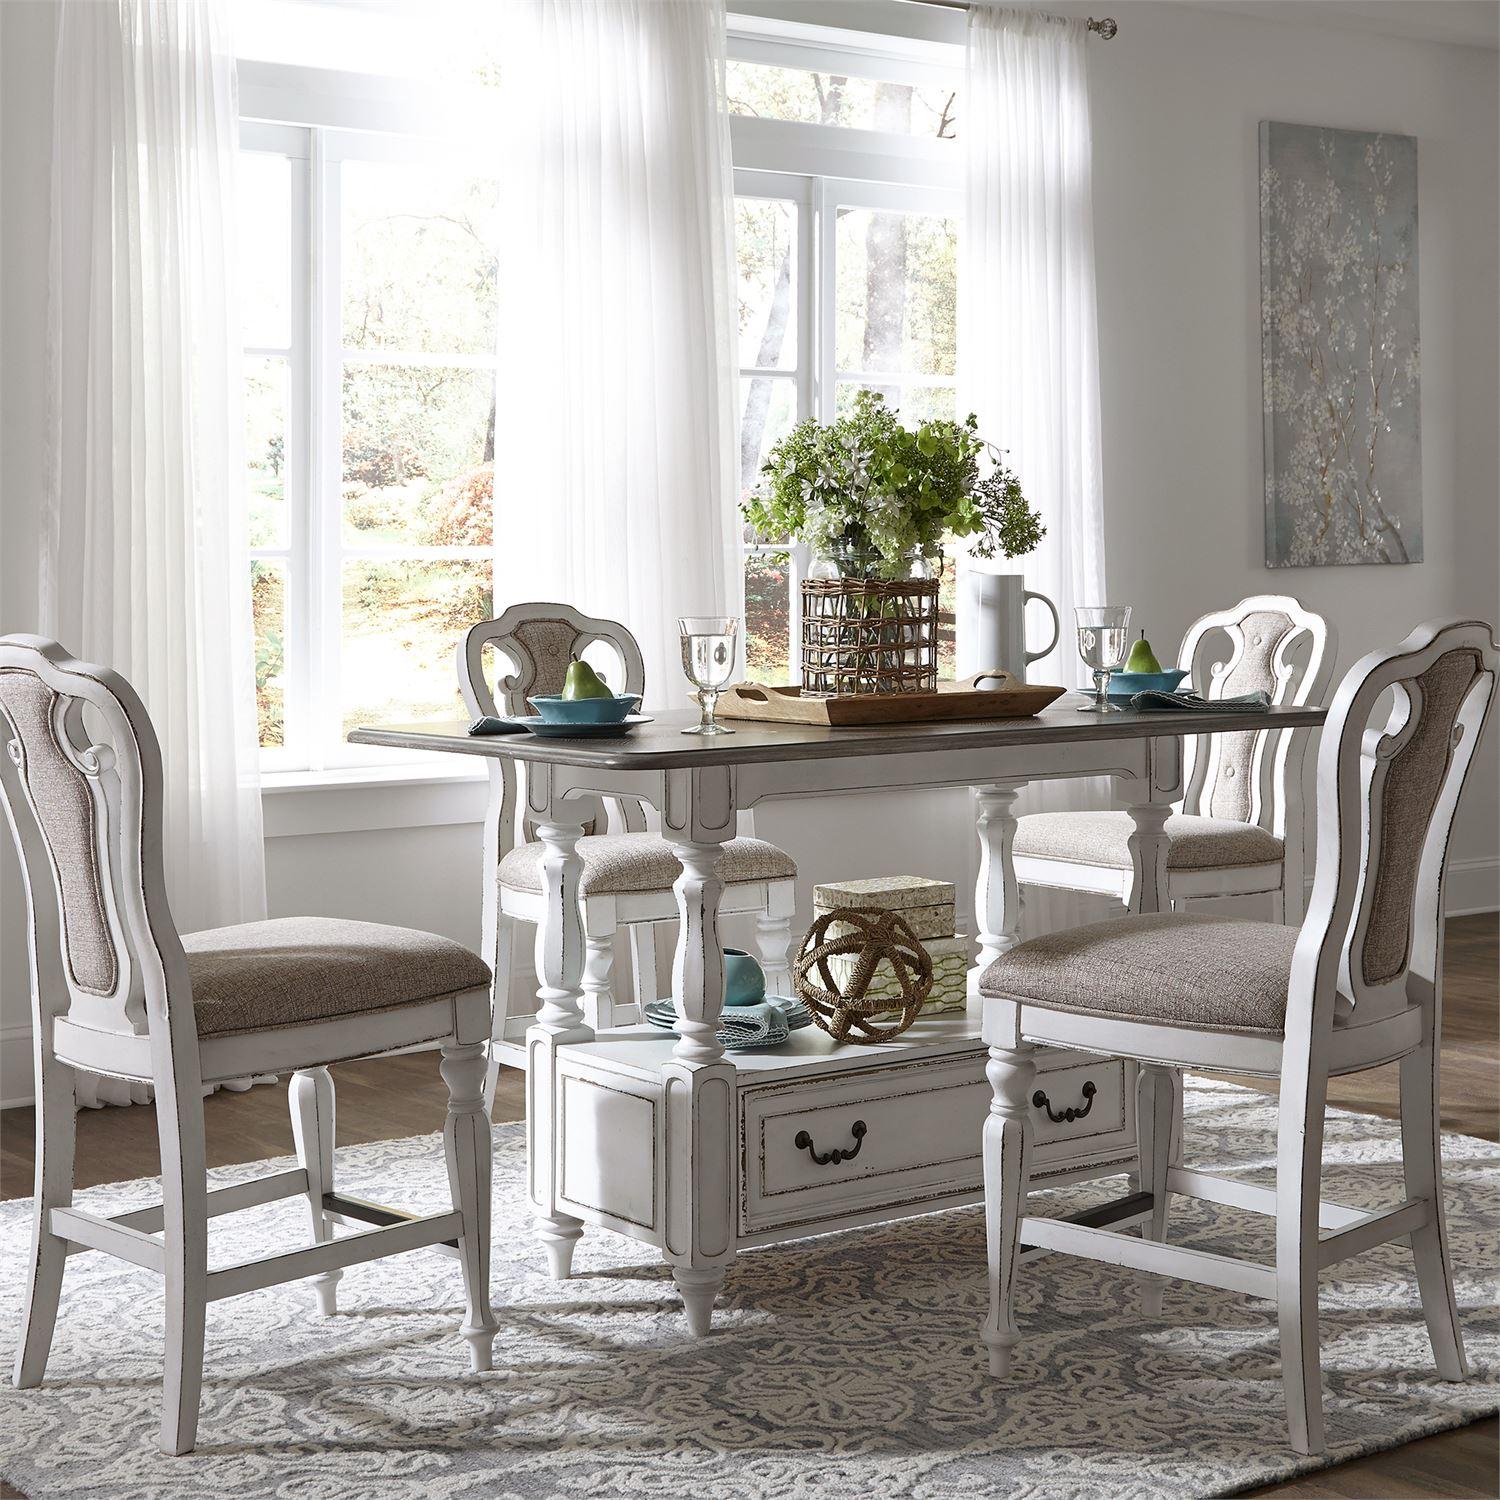 European Traditional Counter Dining Set Magnolia Manor  (244-DR) Dining Room Set 244-DR-5GTS in White Chenille